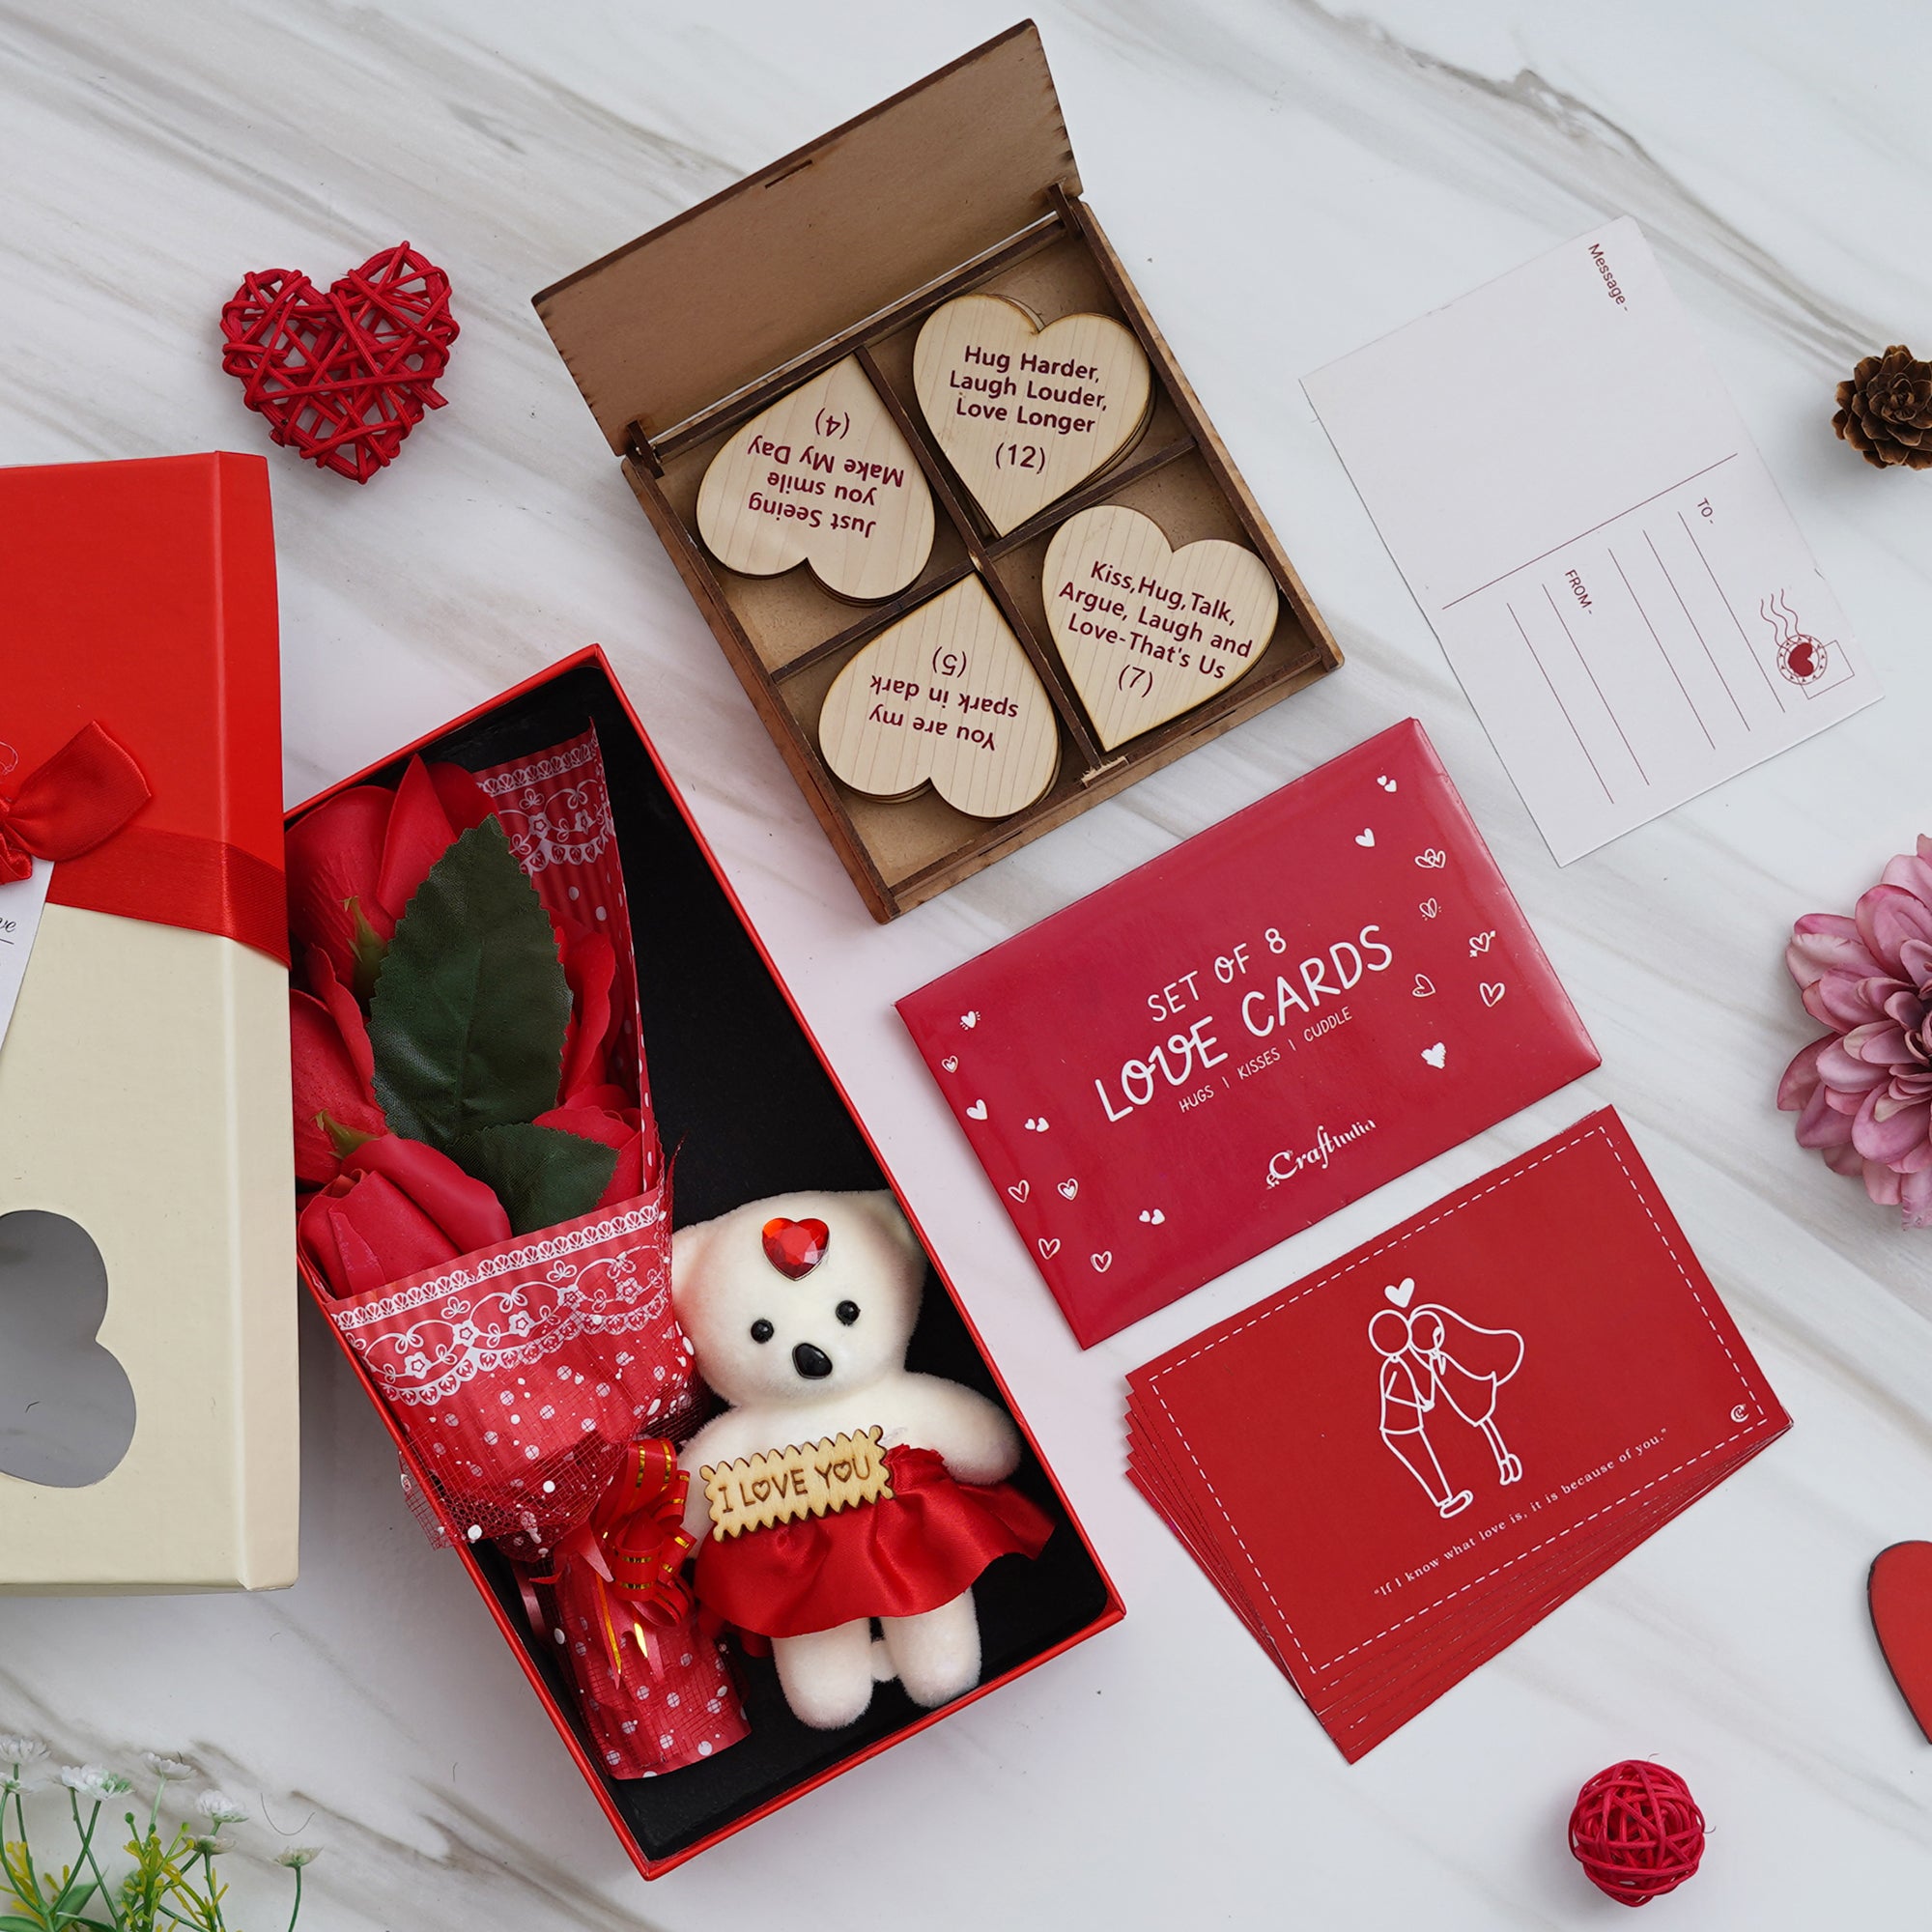 Valentine Combo of Pack of 8 Love Gift Cards, "20 Reasons Why I Love You" Printed on Little Hearts Wooden Gift Set, Red Roses Bouquet and White, Red Teddy Bear Valentine's Rectangle Shaped Gift Box